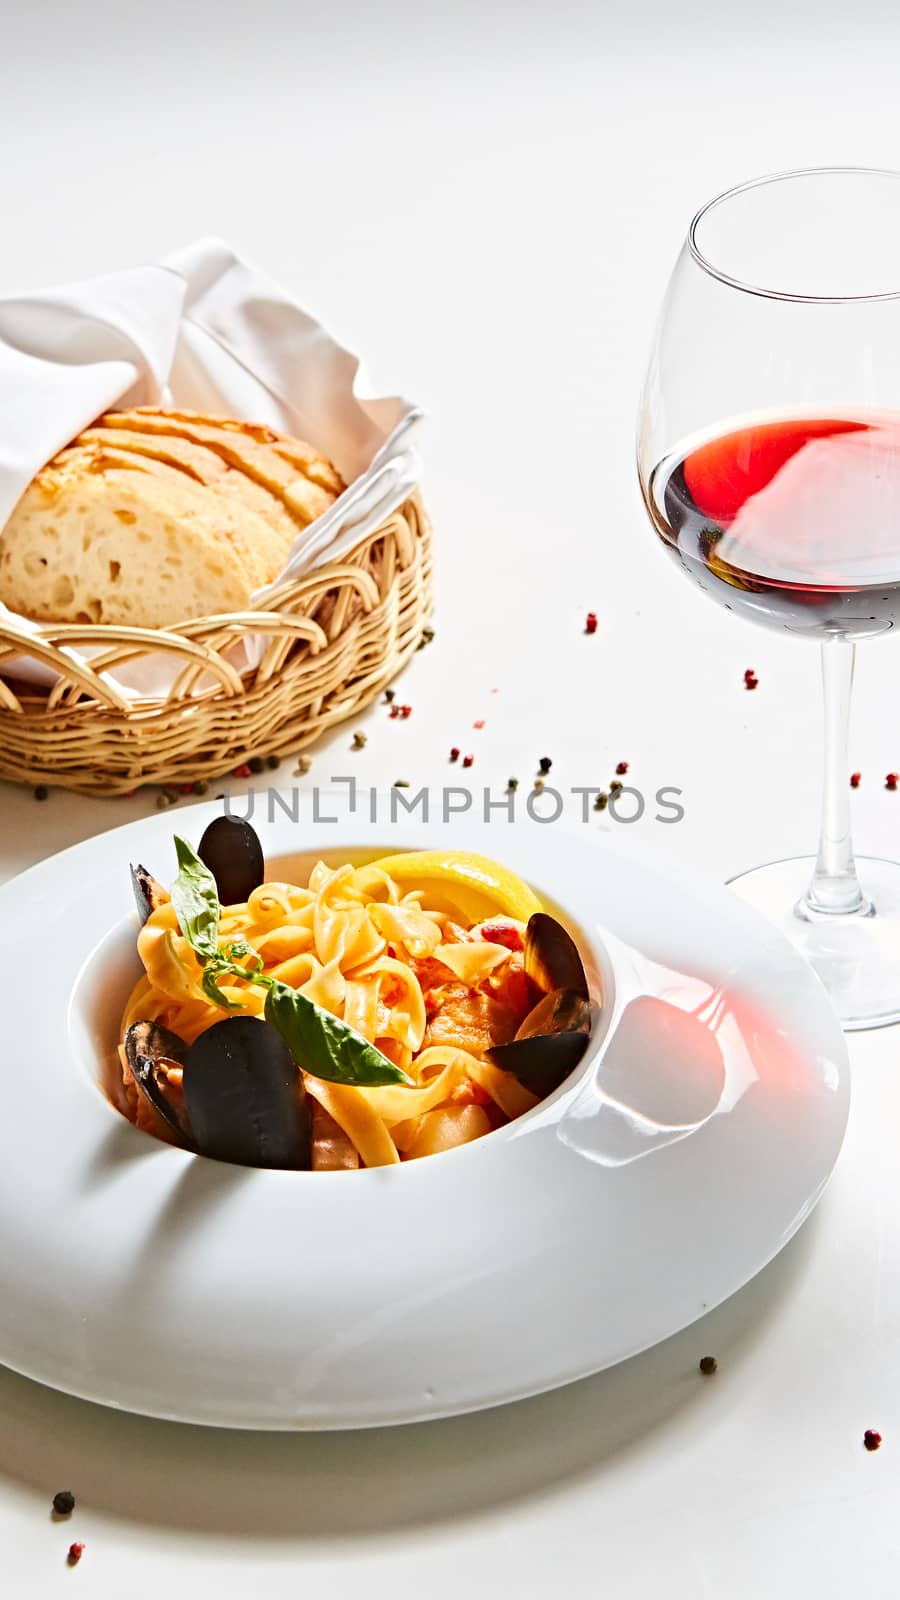 The cooked mussels and pasta with wine glass